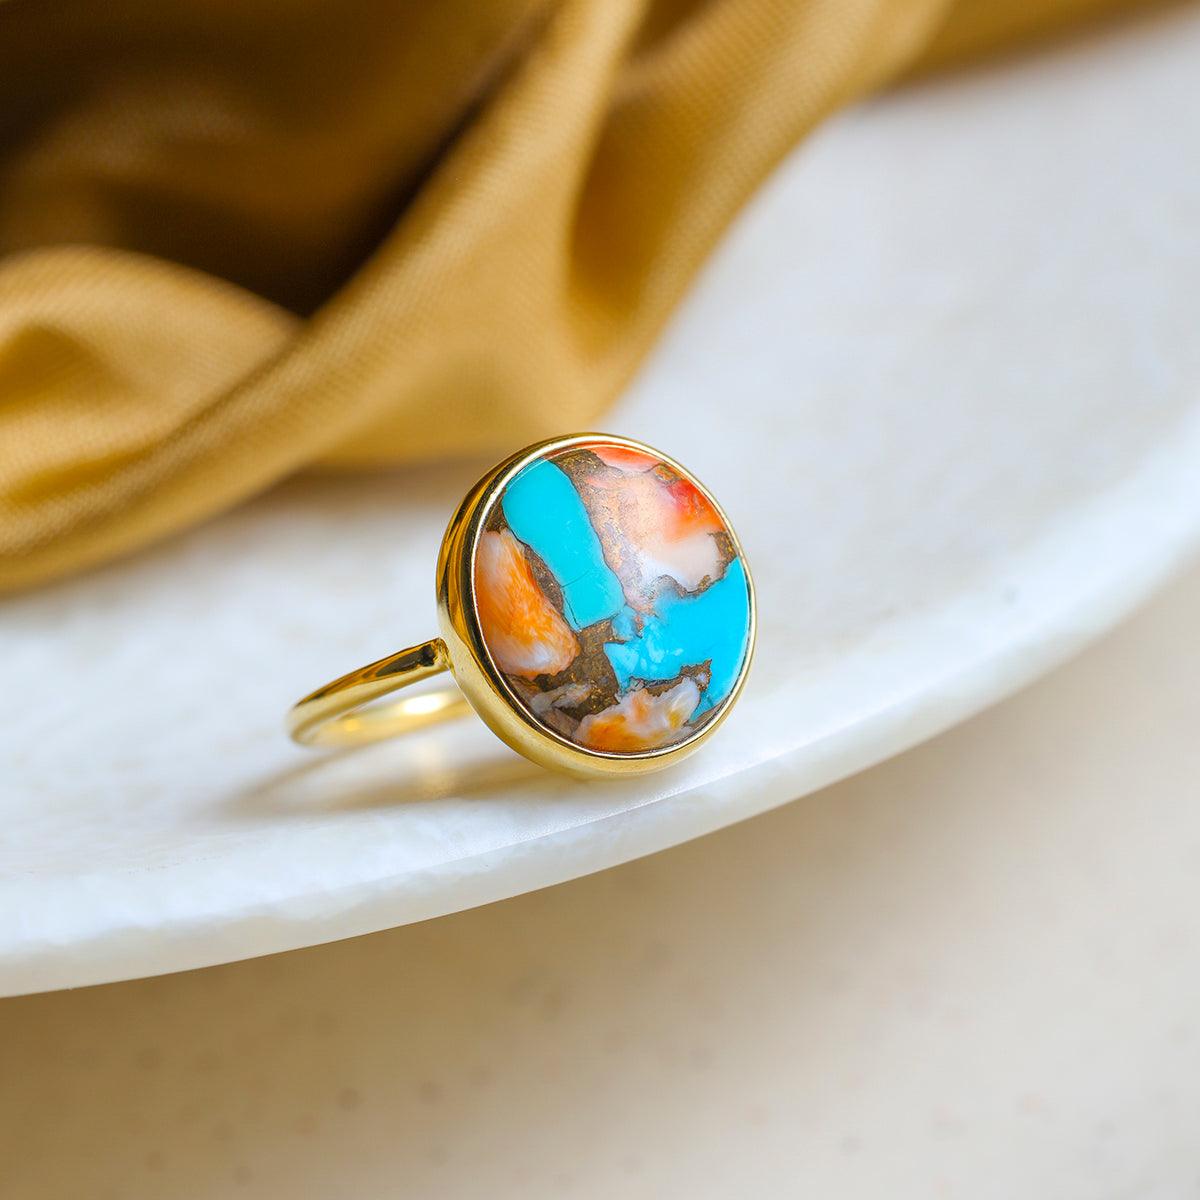 Oyster Copper Turquoise Solitaire Ring 14k Gold Over 925 Silver - YoTreasure